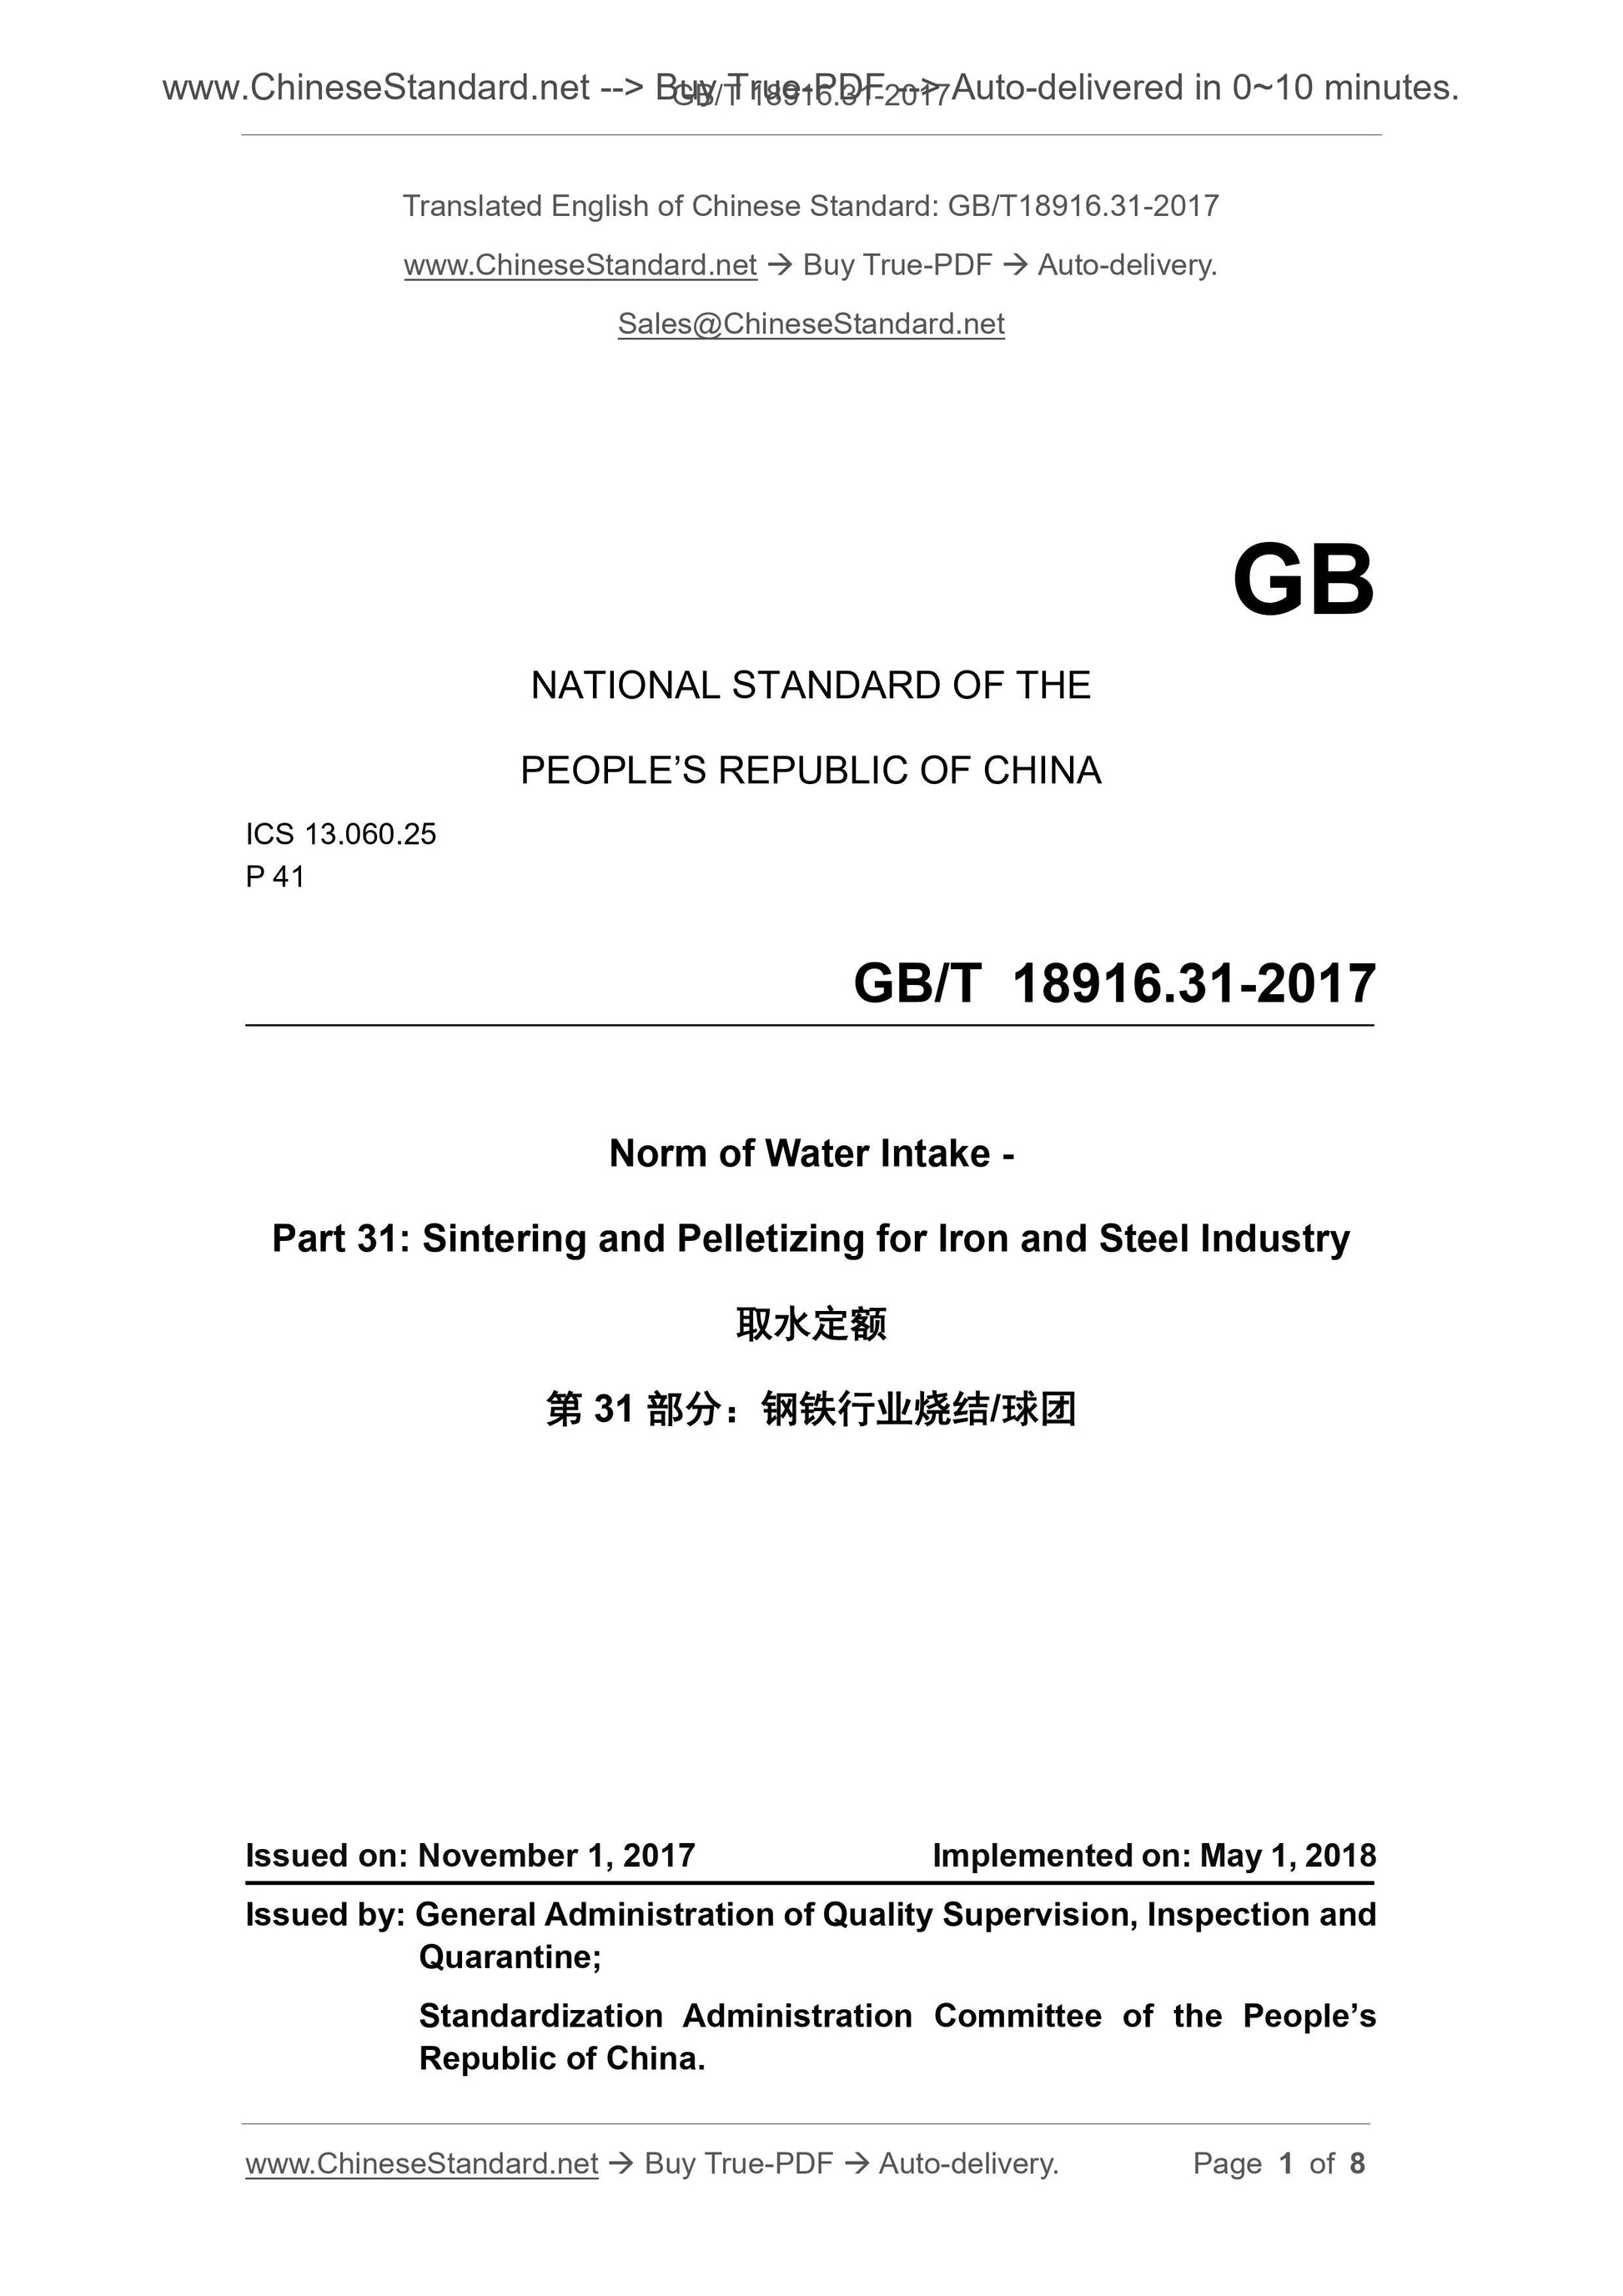 GB/T 18916.31-2017 Page 1